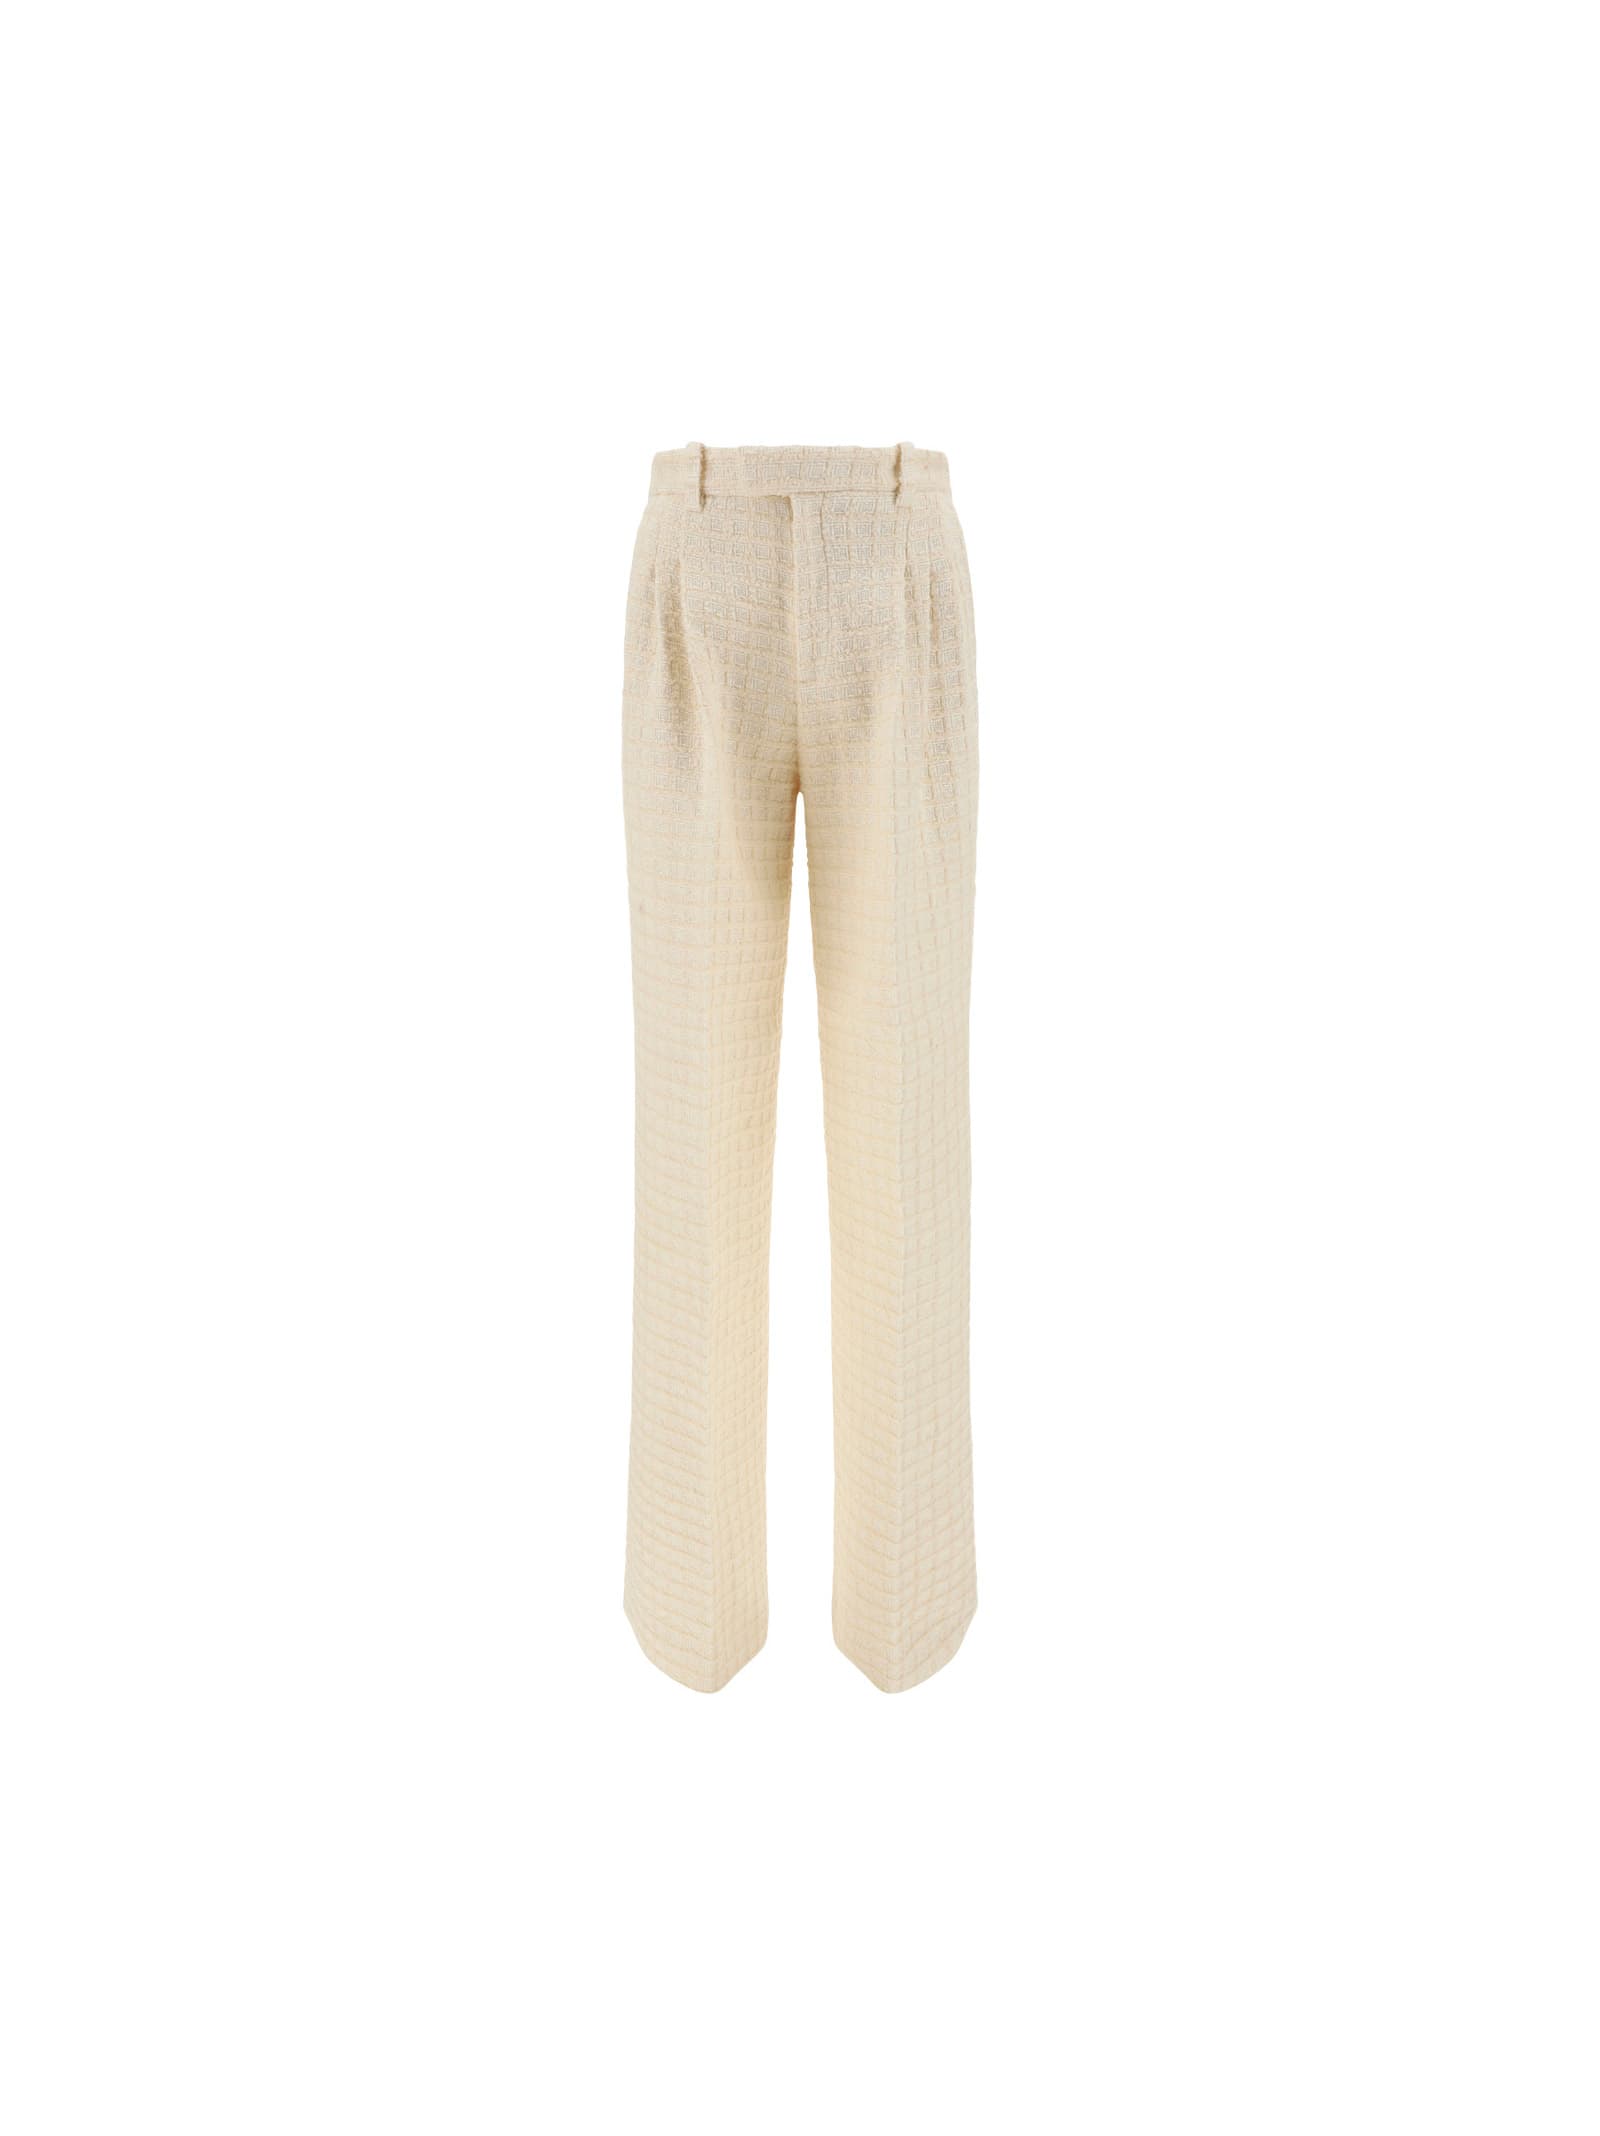 Womens Gucci Trousers  Flare Trousers  Harrods UK